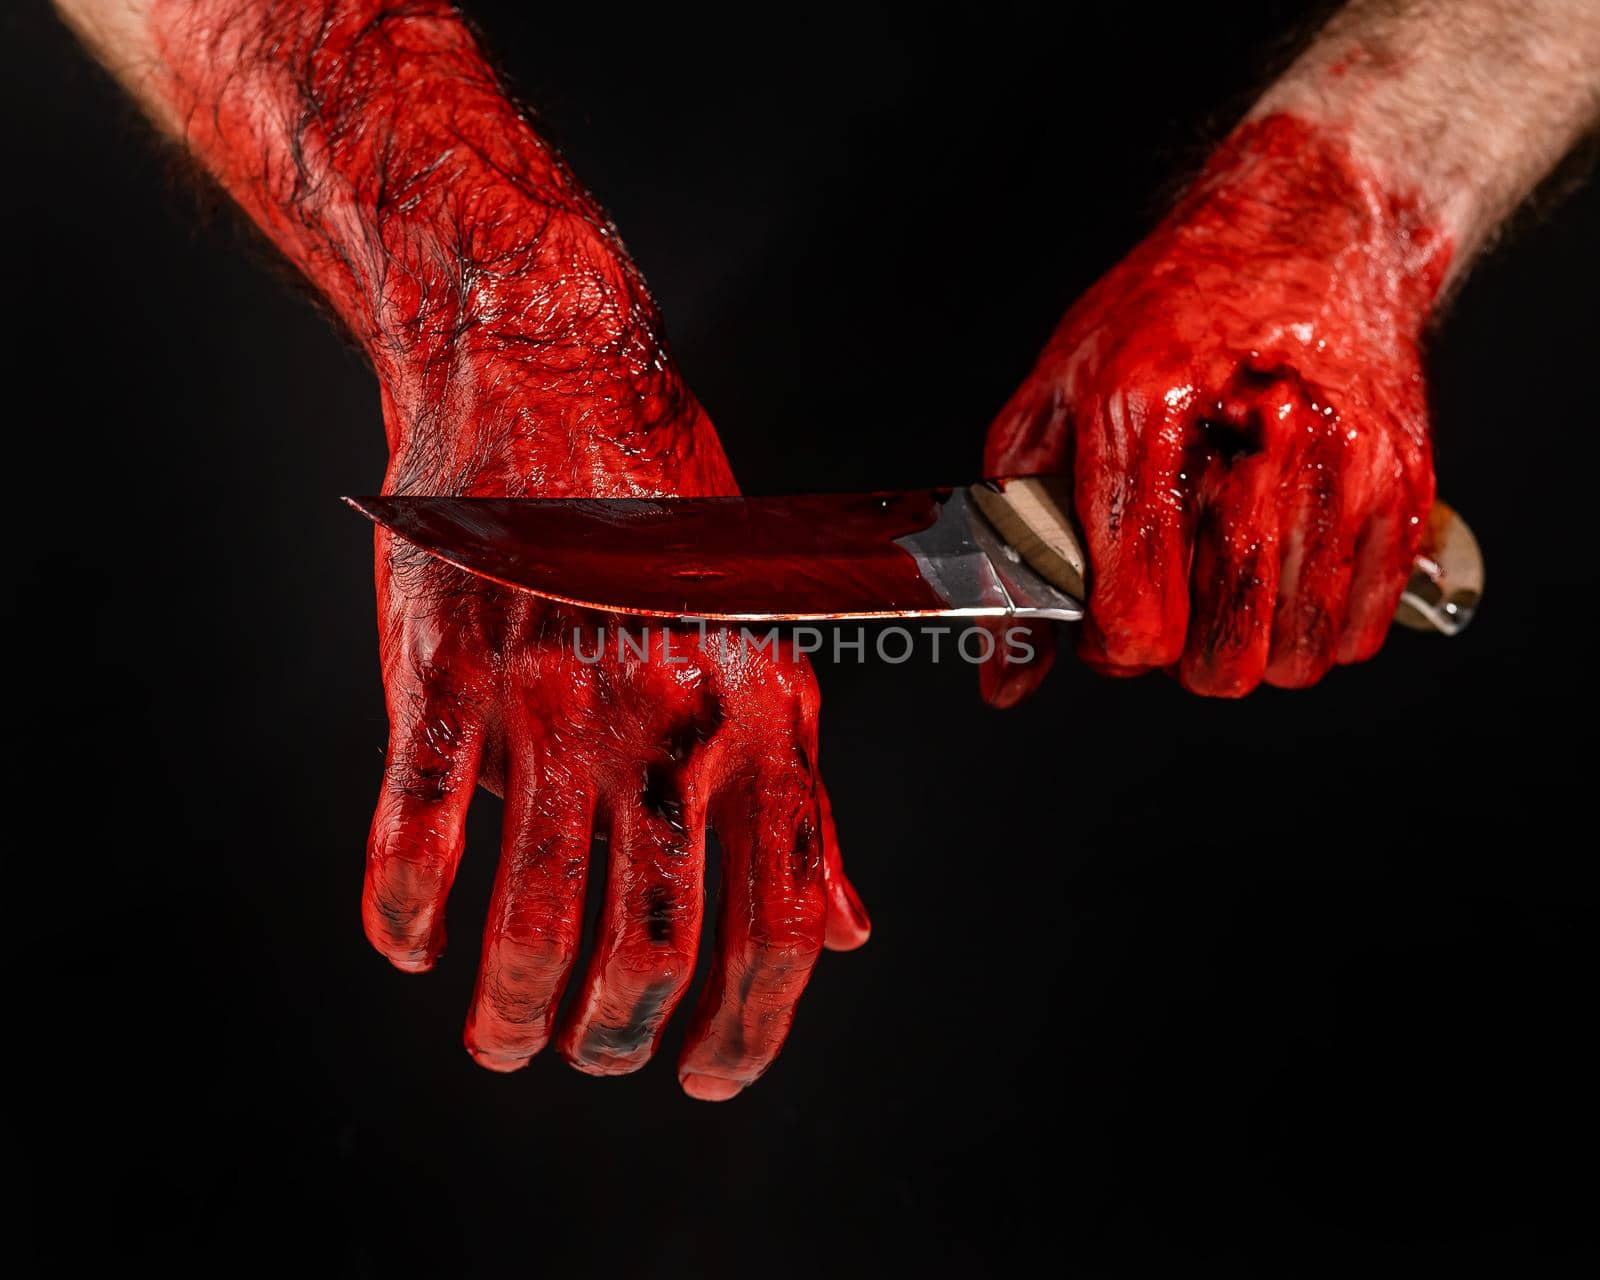 Man holding knife with bloody hand on black background. by mrwed54